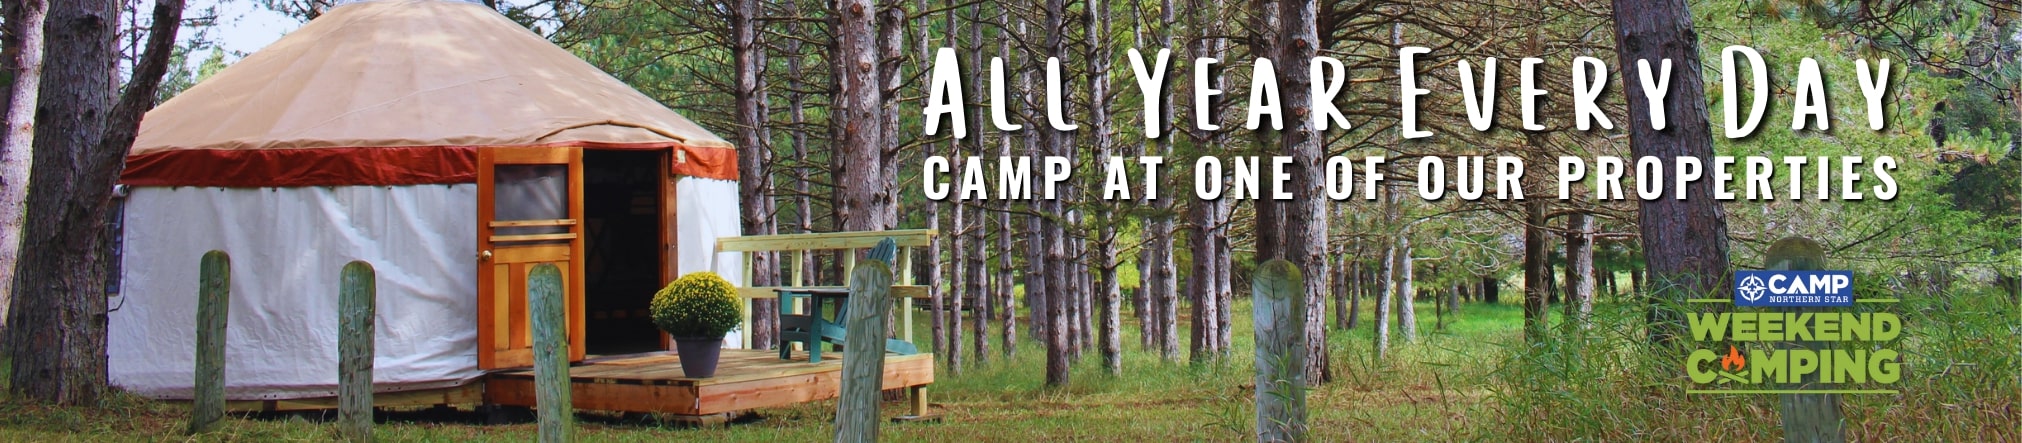 All year every year - camp at one of our camp properties.